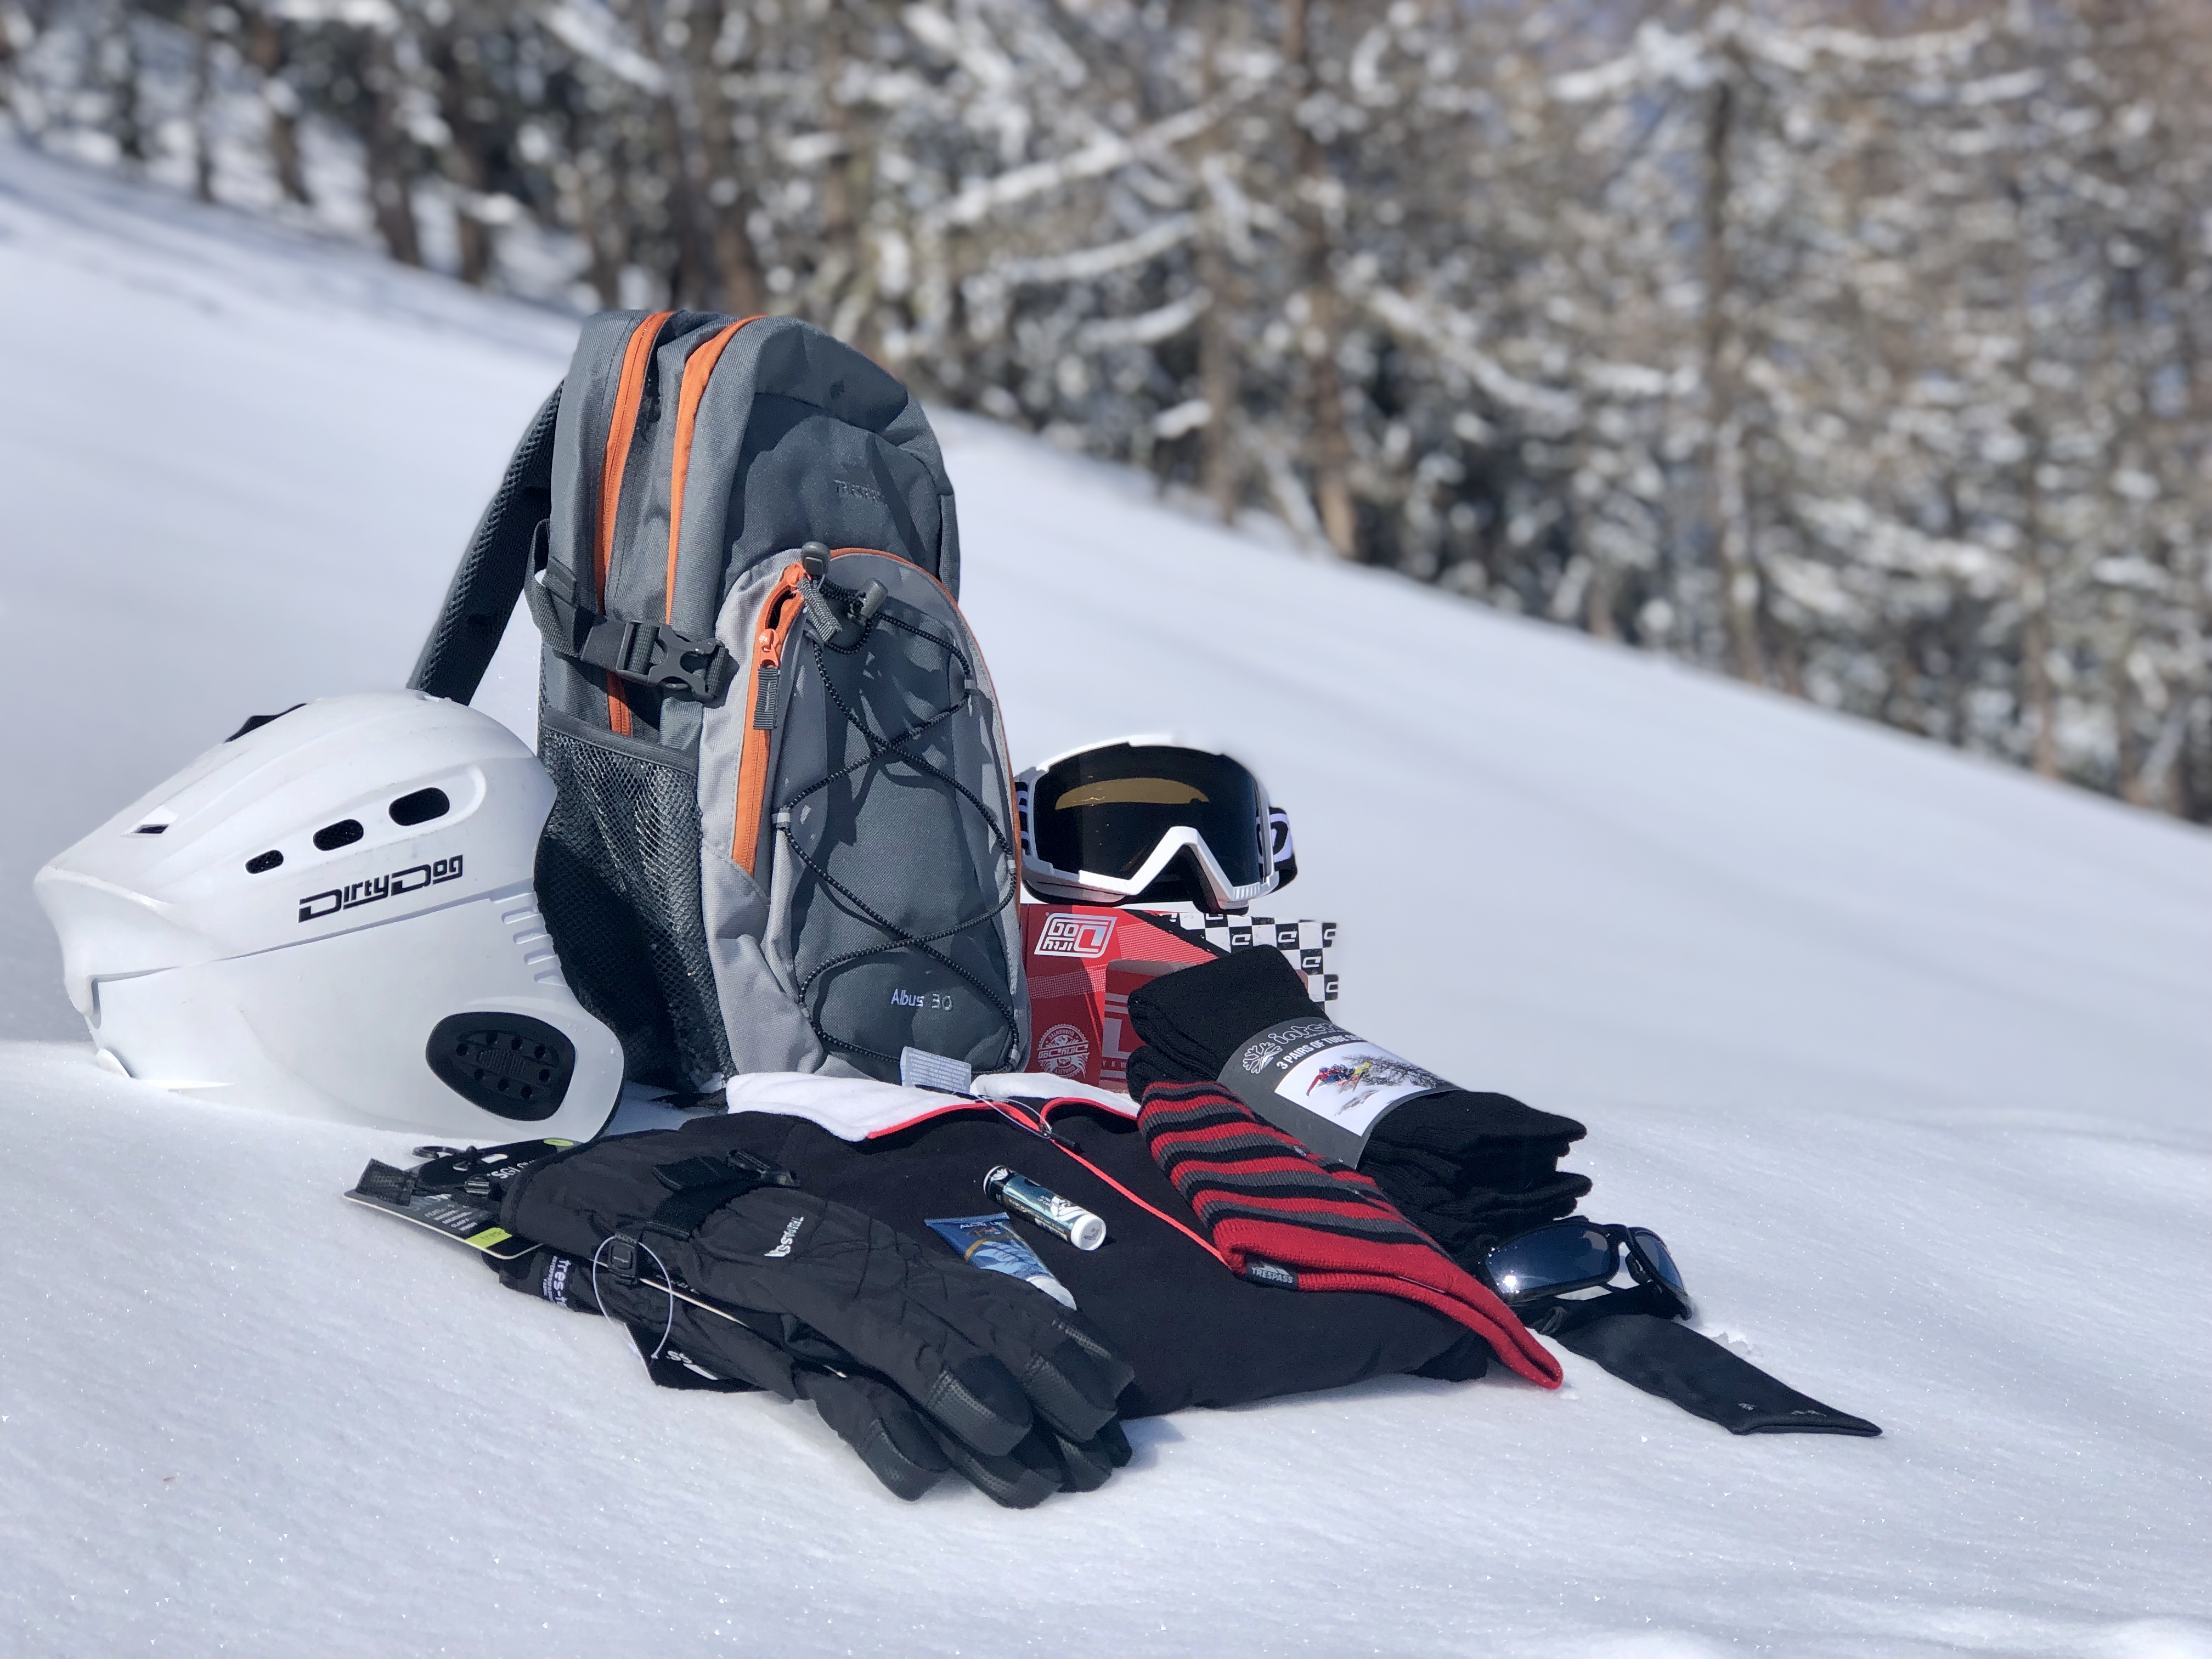 6 Essentials To Pack For Your Ski Trip - Ski Whiz